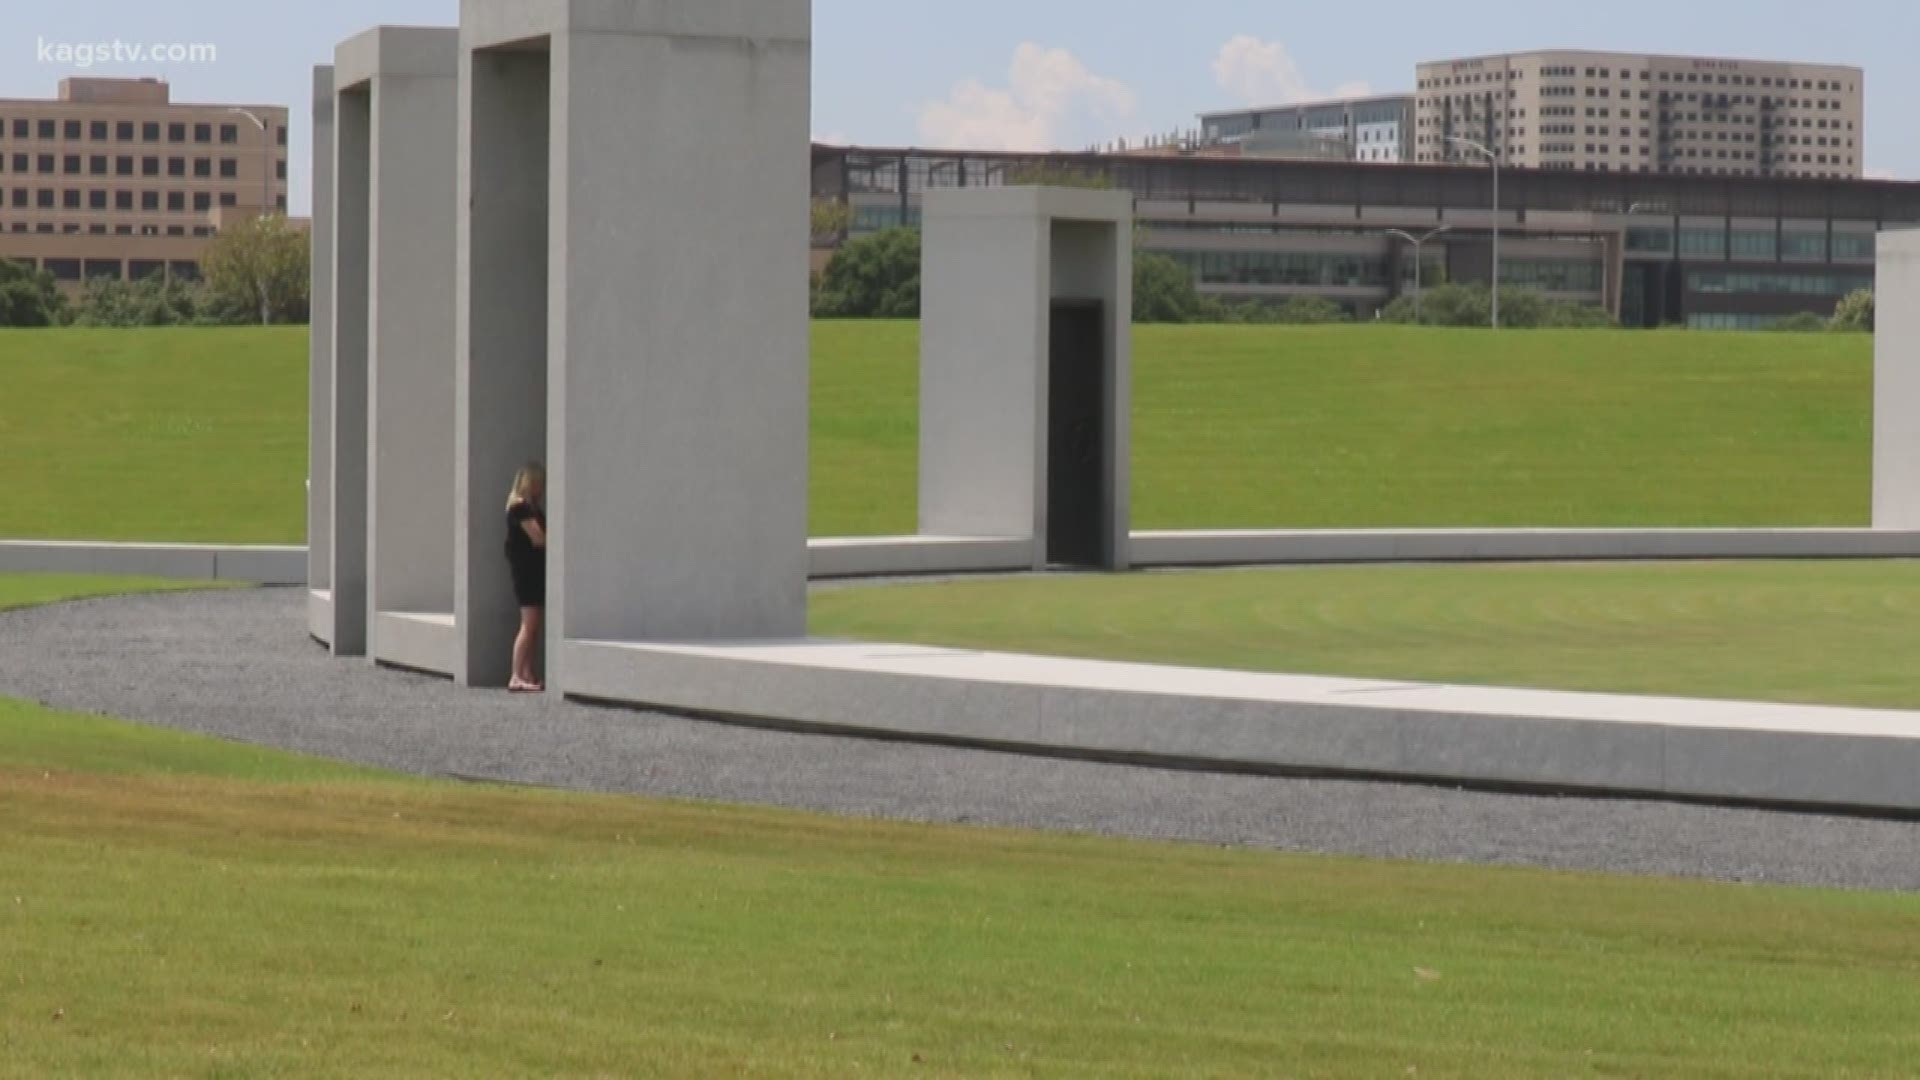 The structure was built in memory of the twelve lives lost during the TAMU bonfire collapse in 1999.